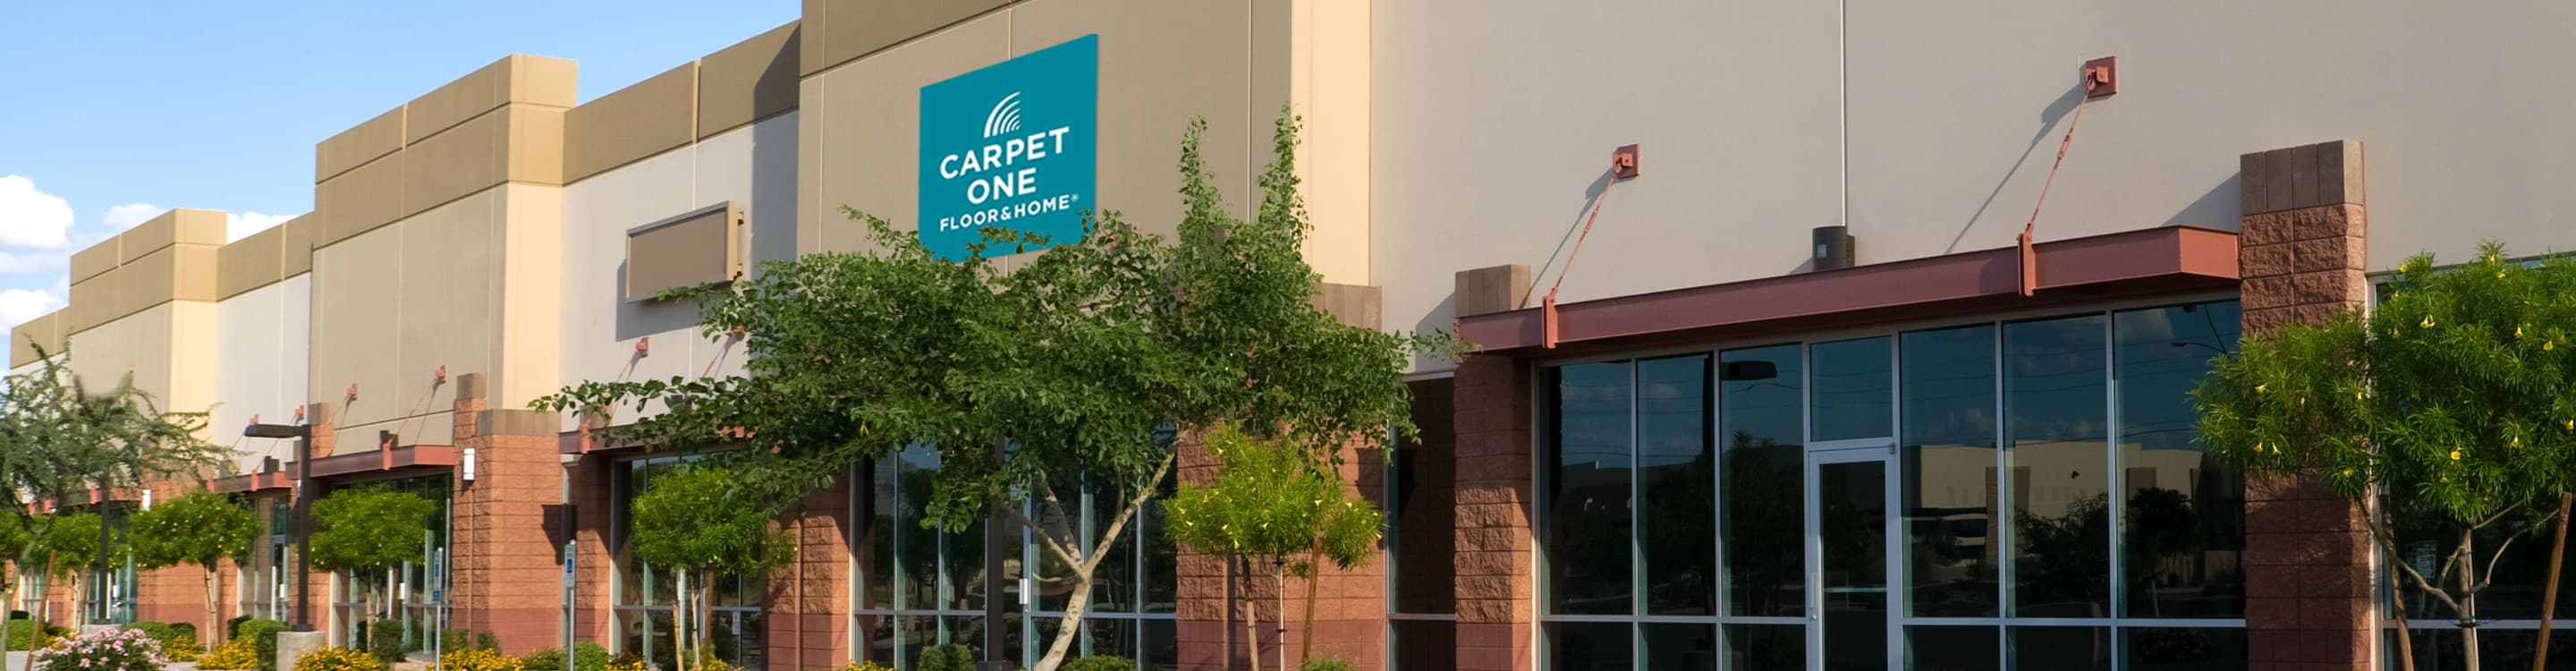 Carpet One Store front